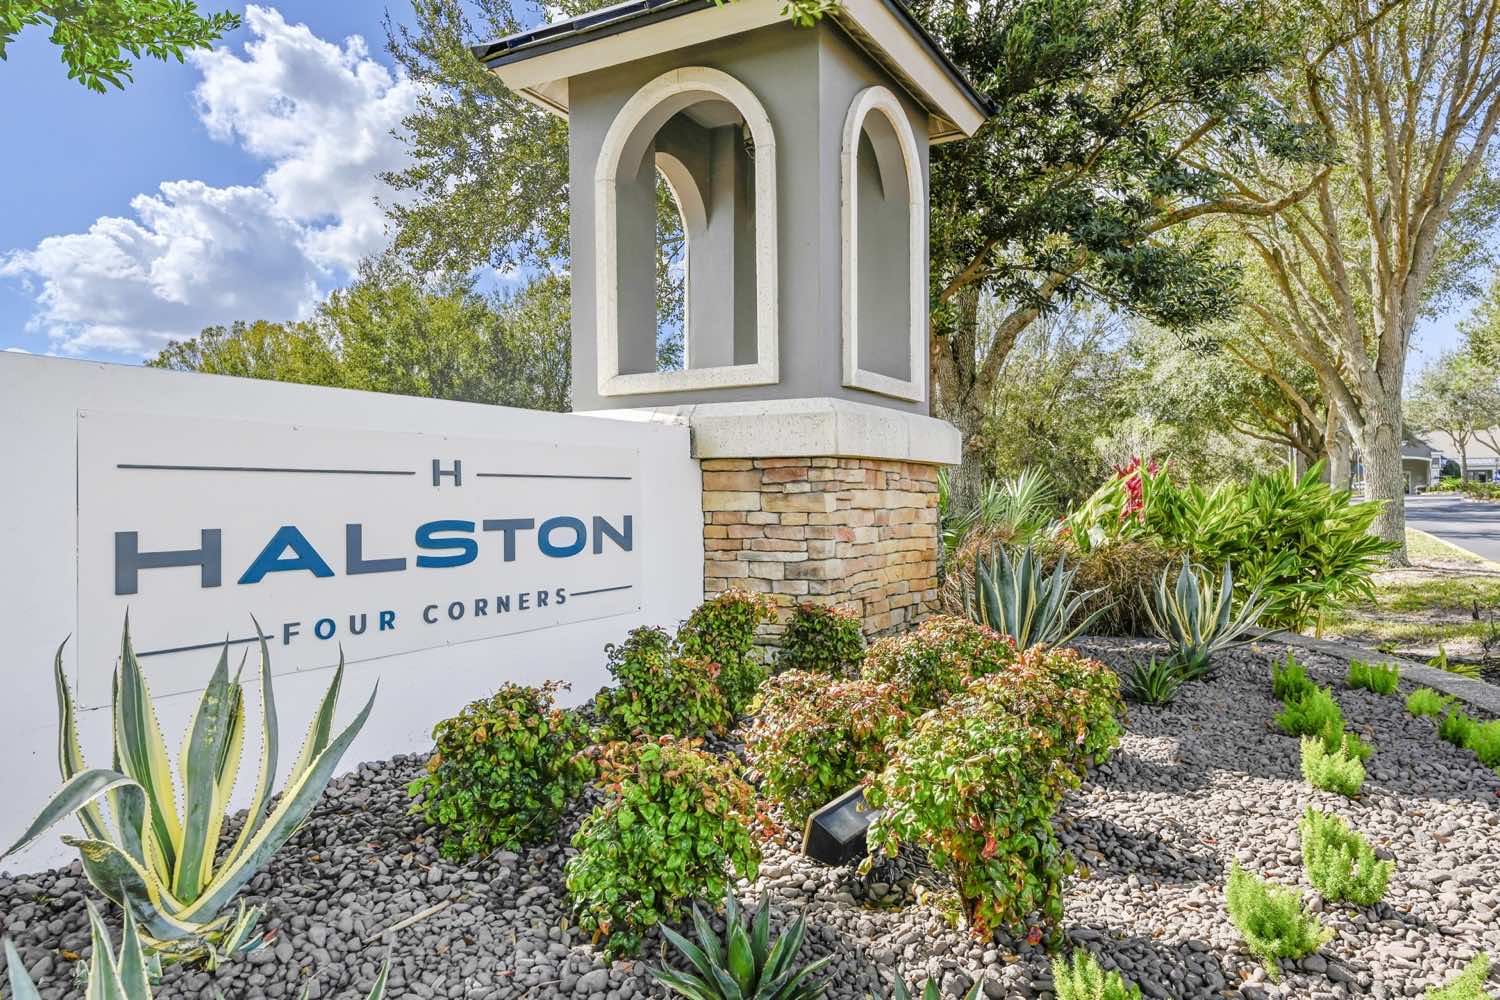 Halston Four Corners signage surrounded by landscaping